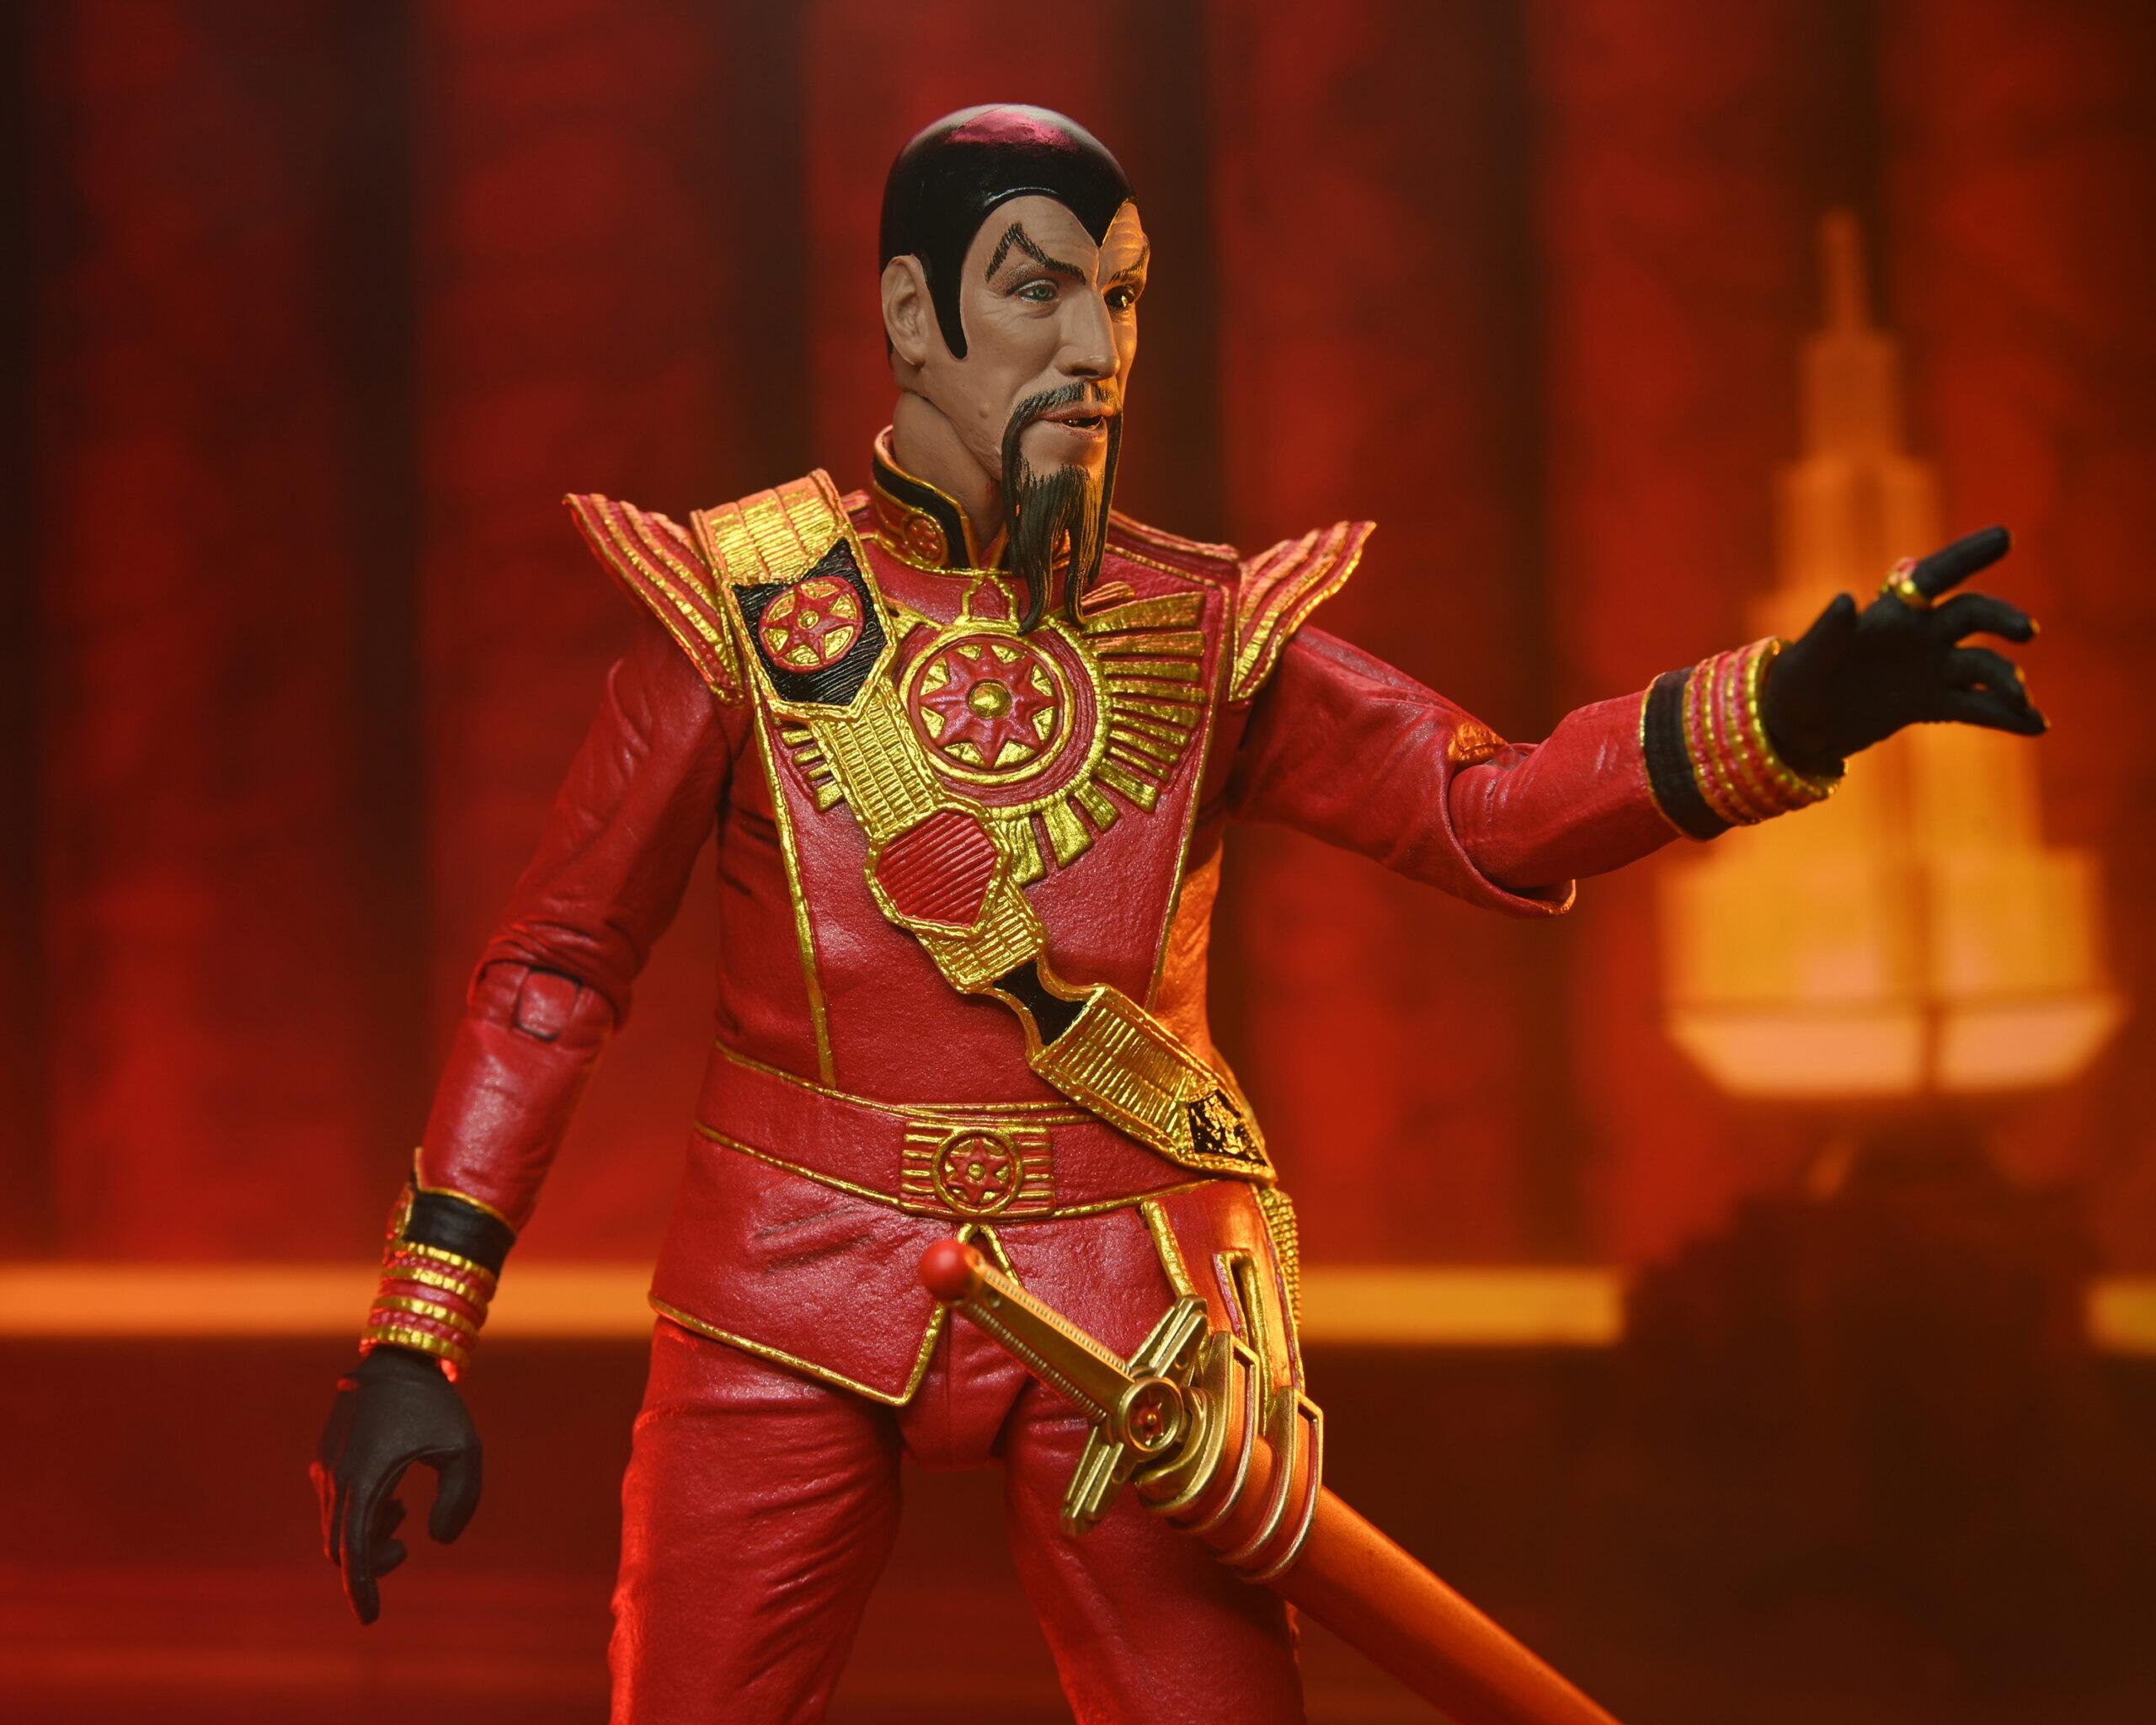 Flash Gordon (1980 Movie) Ultimate 7inch Scale Action Figure - Ming (Red  Military Outfit) (King Features)